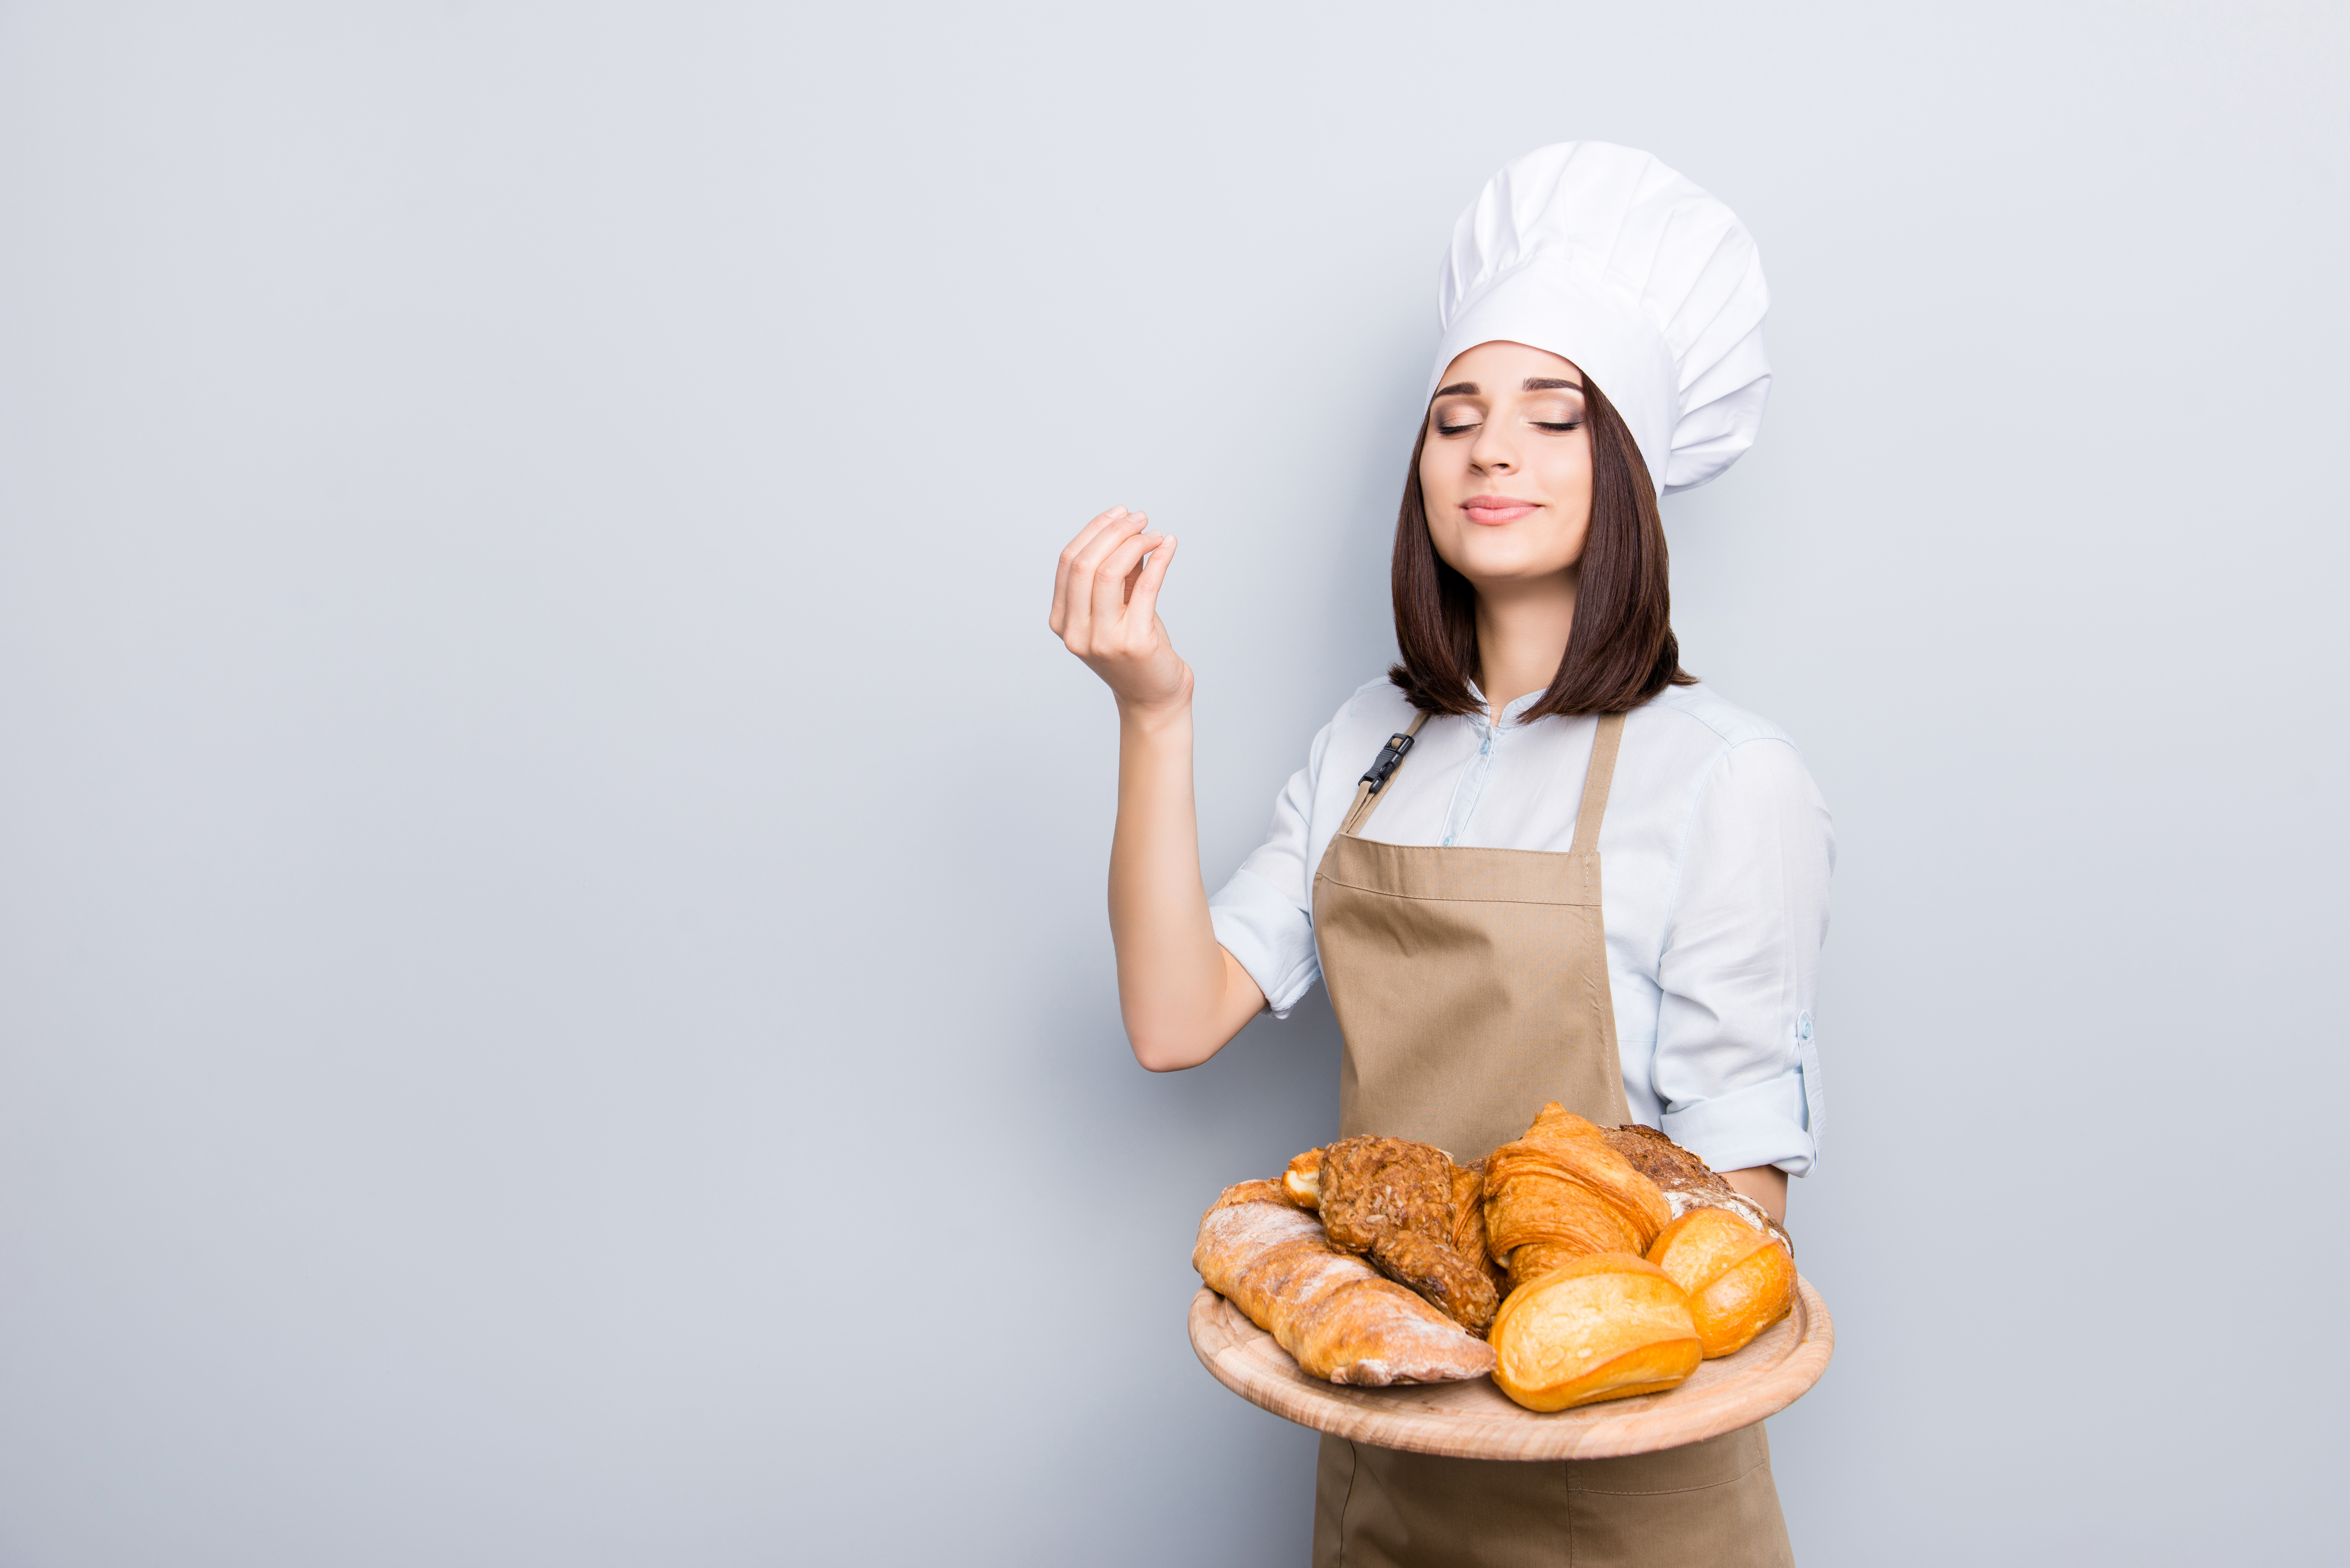 A chef holding a plate of pastries | Source: Shutterstock